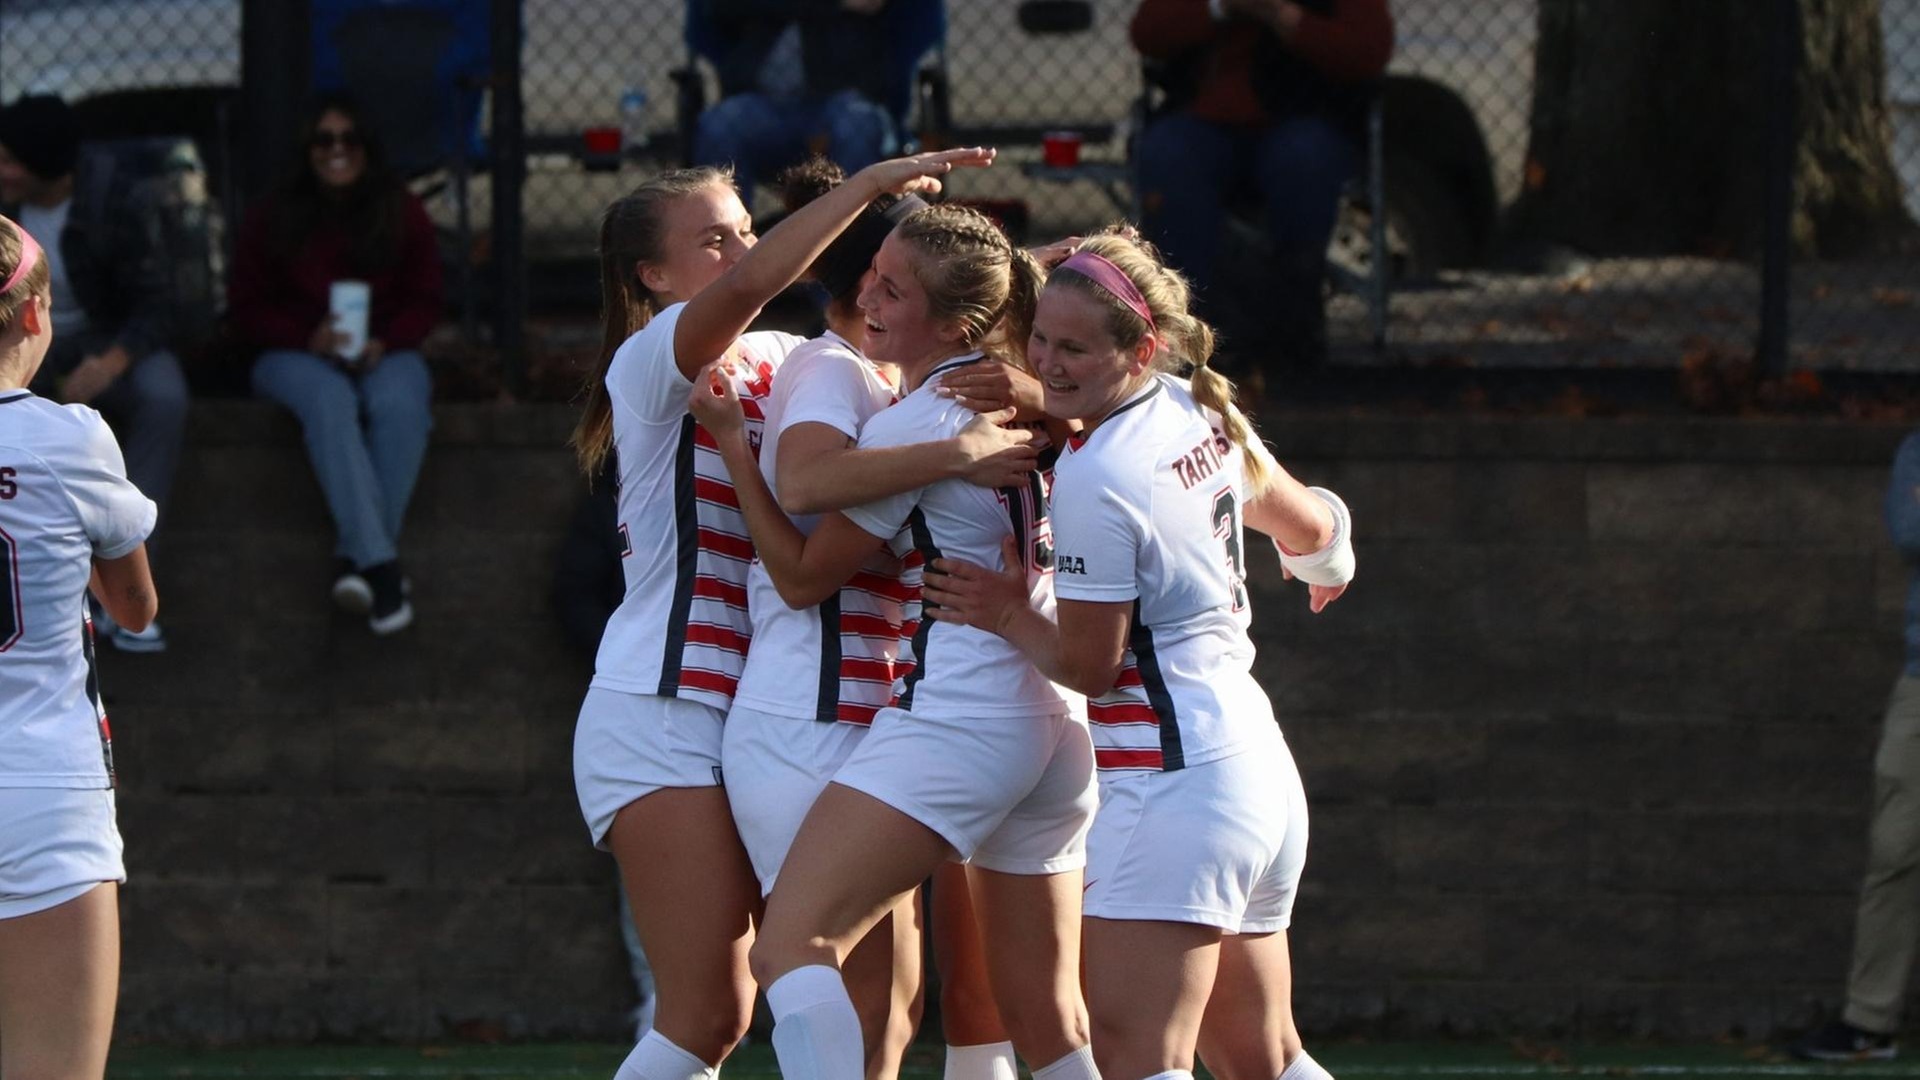 group of women's soccer players hugging in celebration after scoring a goal